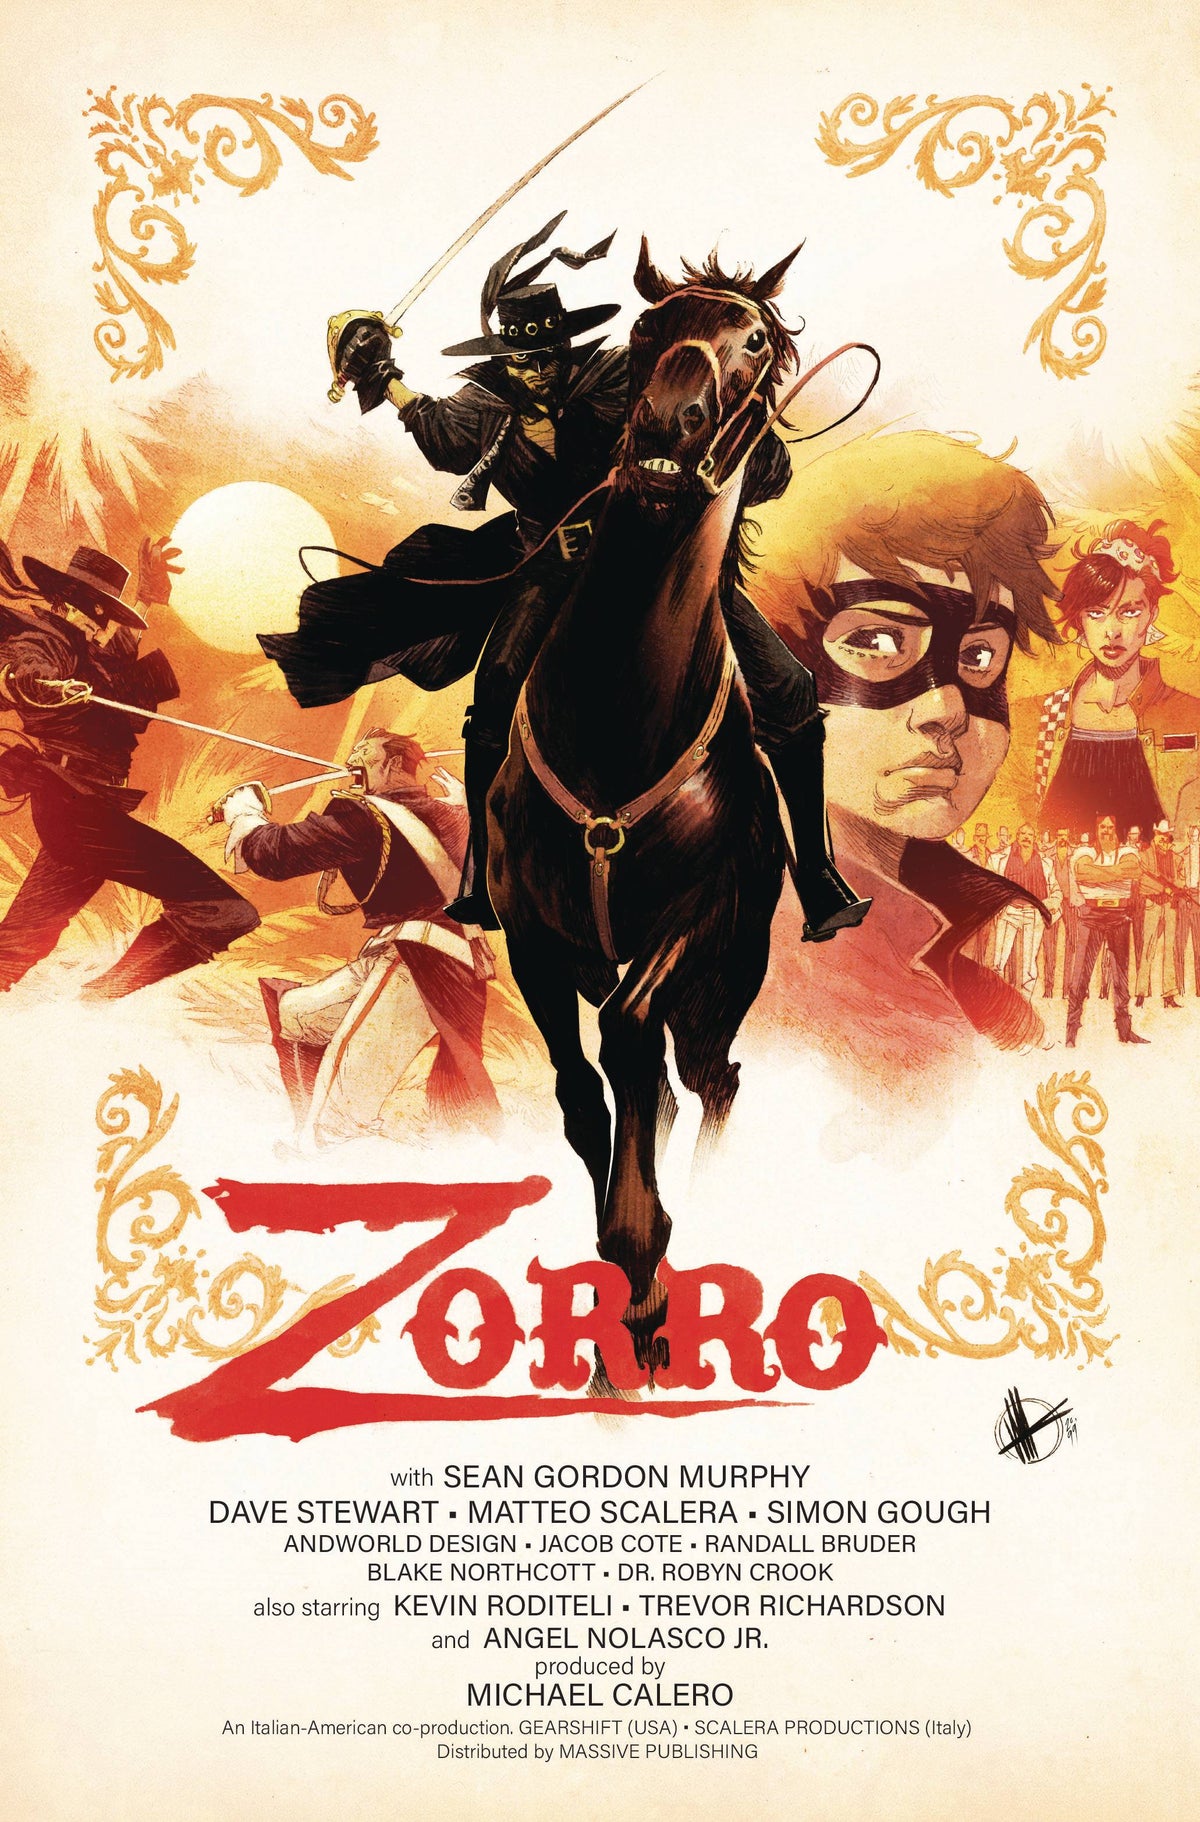 ZORRO MAN OF THE DEAD #1 (OF 4) CVR C SCALERA MOVIE POSTER HIMAGE COVER